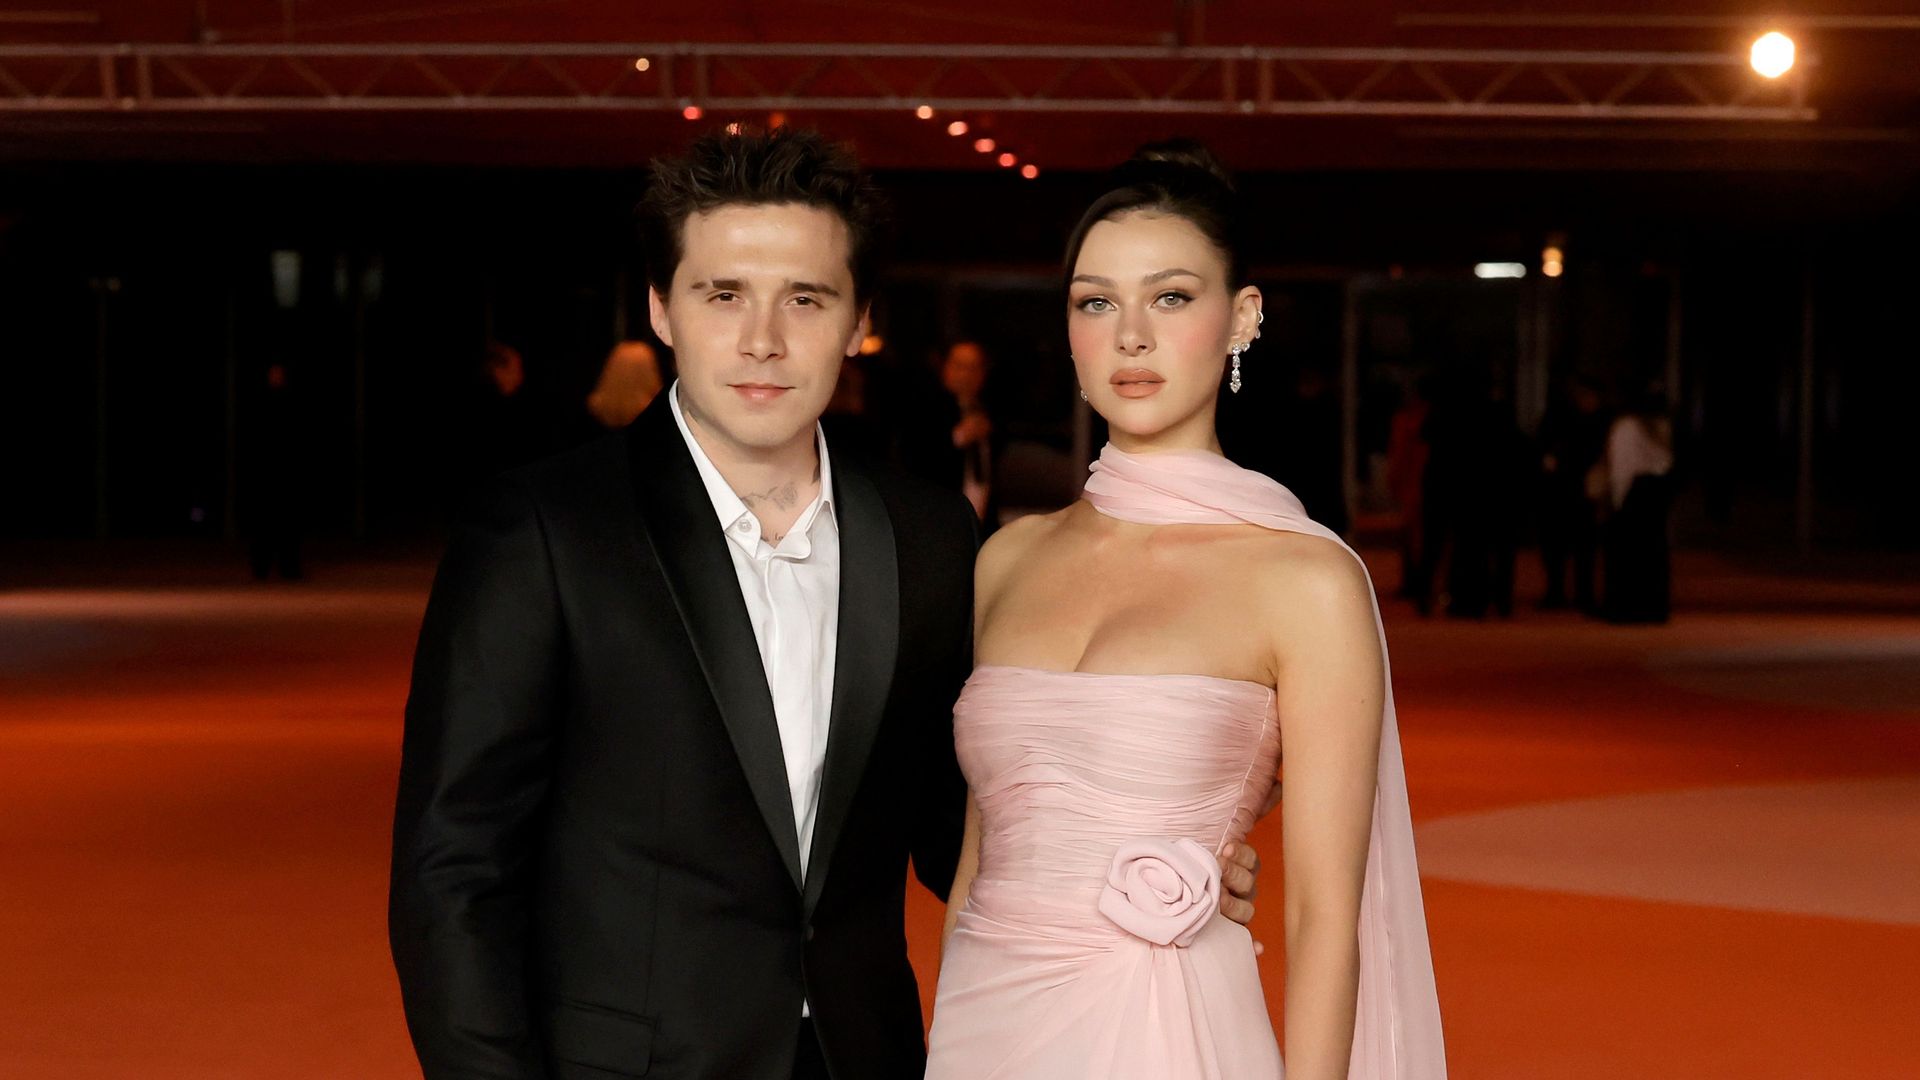 Brooklyn Beckham and Nicola Peltz at the Los Angeles event at the Academy Museum of Motion Pictures